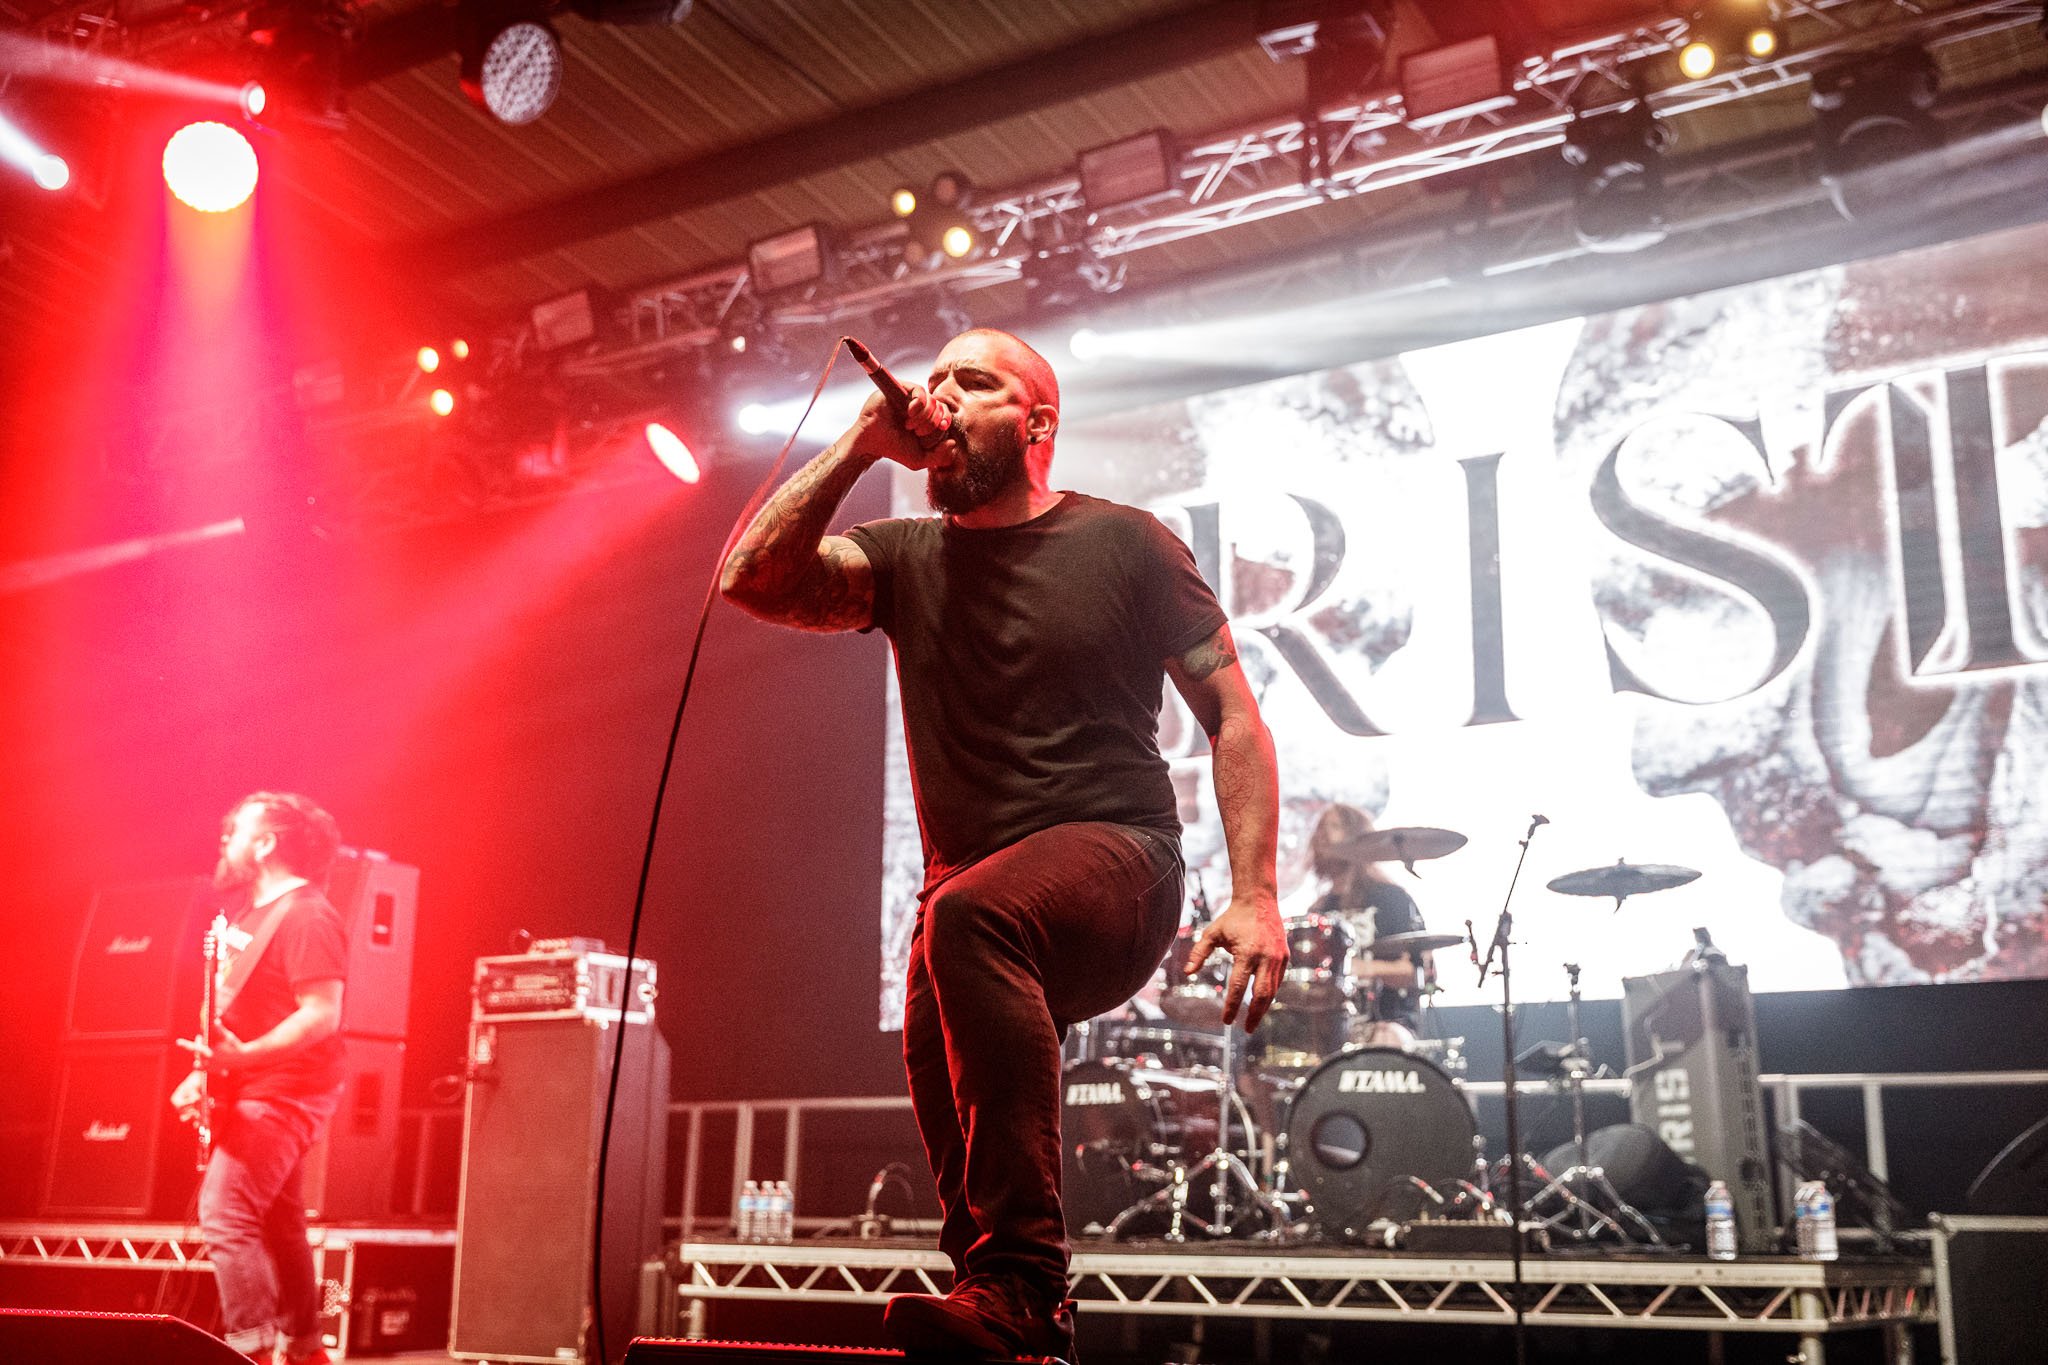 Irist at the Damnation Festival in Manchester on November 5th 20